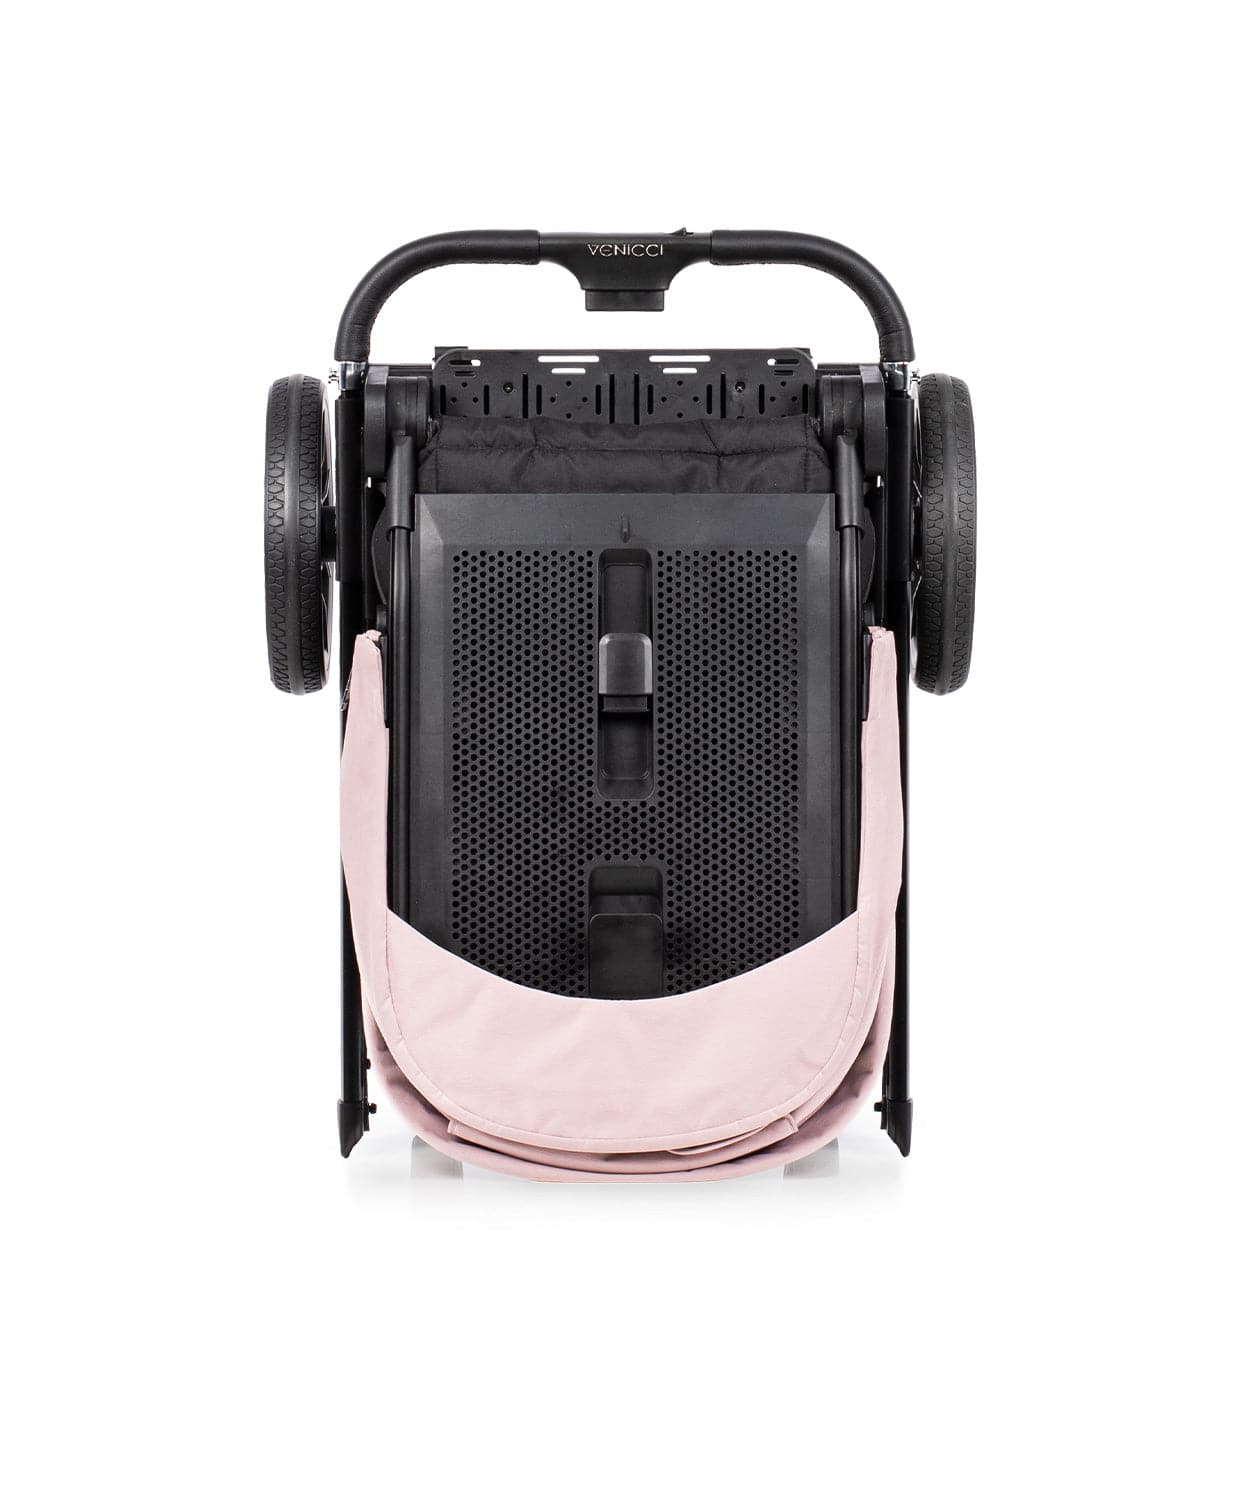 Venicci Empire - Deluxe City Travel System Bundle - Silk Pink -  | For Your Little One